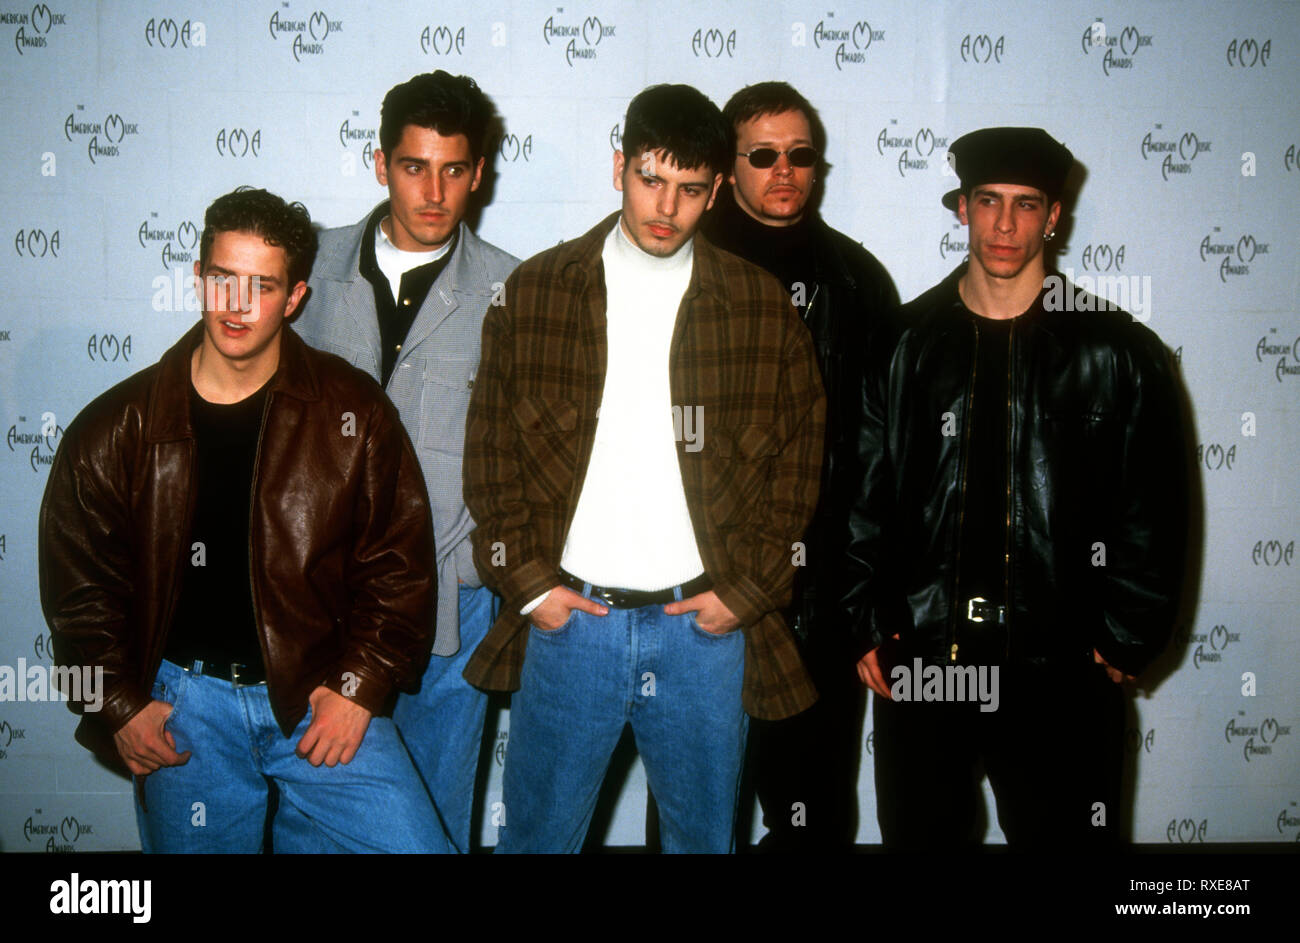 LOS ANGELES, CA - FEBRUARY 7: (L-R) Singers Joey McIntyre, Jonathan Knight, Jordan Knight, Donnie Wahlberg and Danny Wood of New Kids on the Block attend the 21st Annual American Music Awards on February 7, 1994 at Shrine Auditorium in Los Angeles, California. Photo by Barry King/Alamy Stock Photo Stock Photo